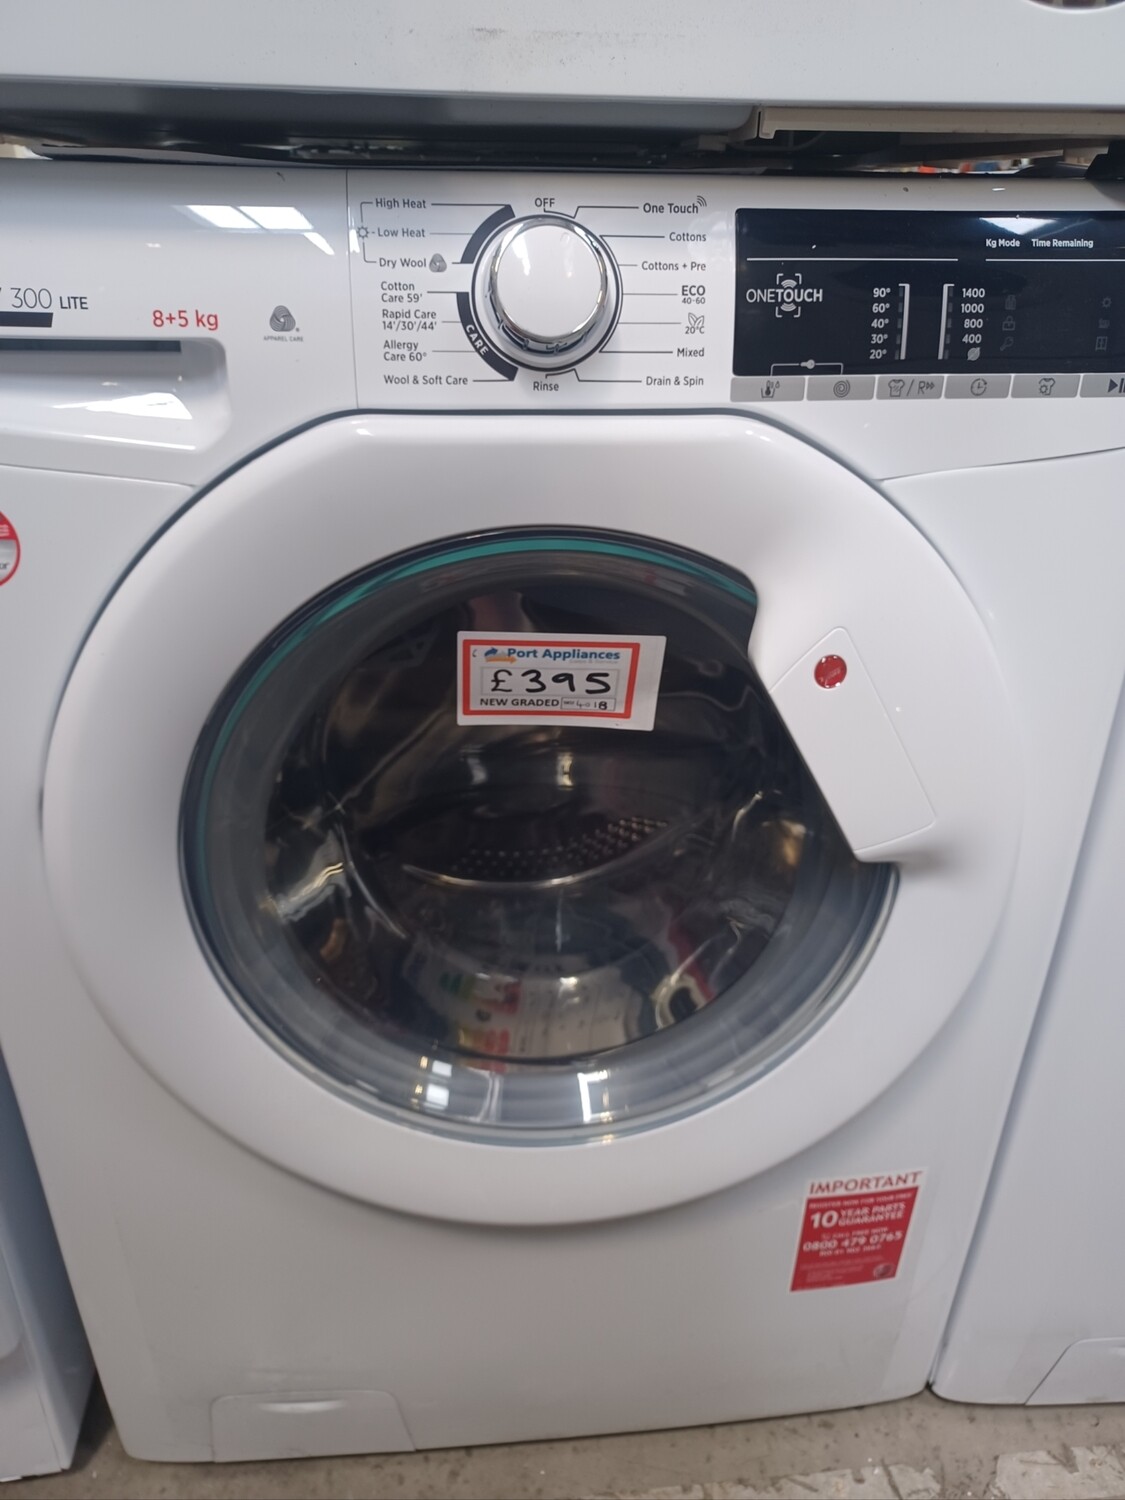 Hoover H3D485TE/1-80 Washer Dryer 8Kg + 5Kg 1400 Spin New Graded +12 Months Guarantee. This item is located in our Whitby Road 